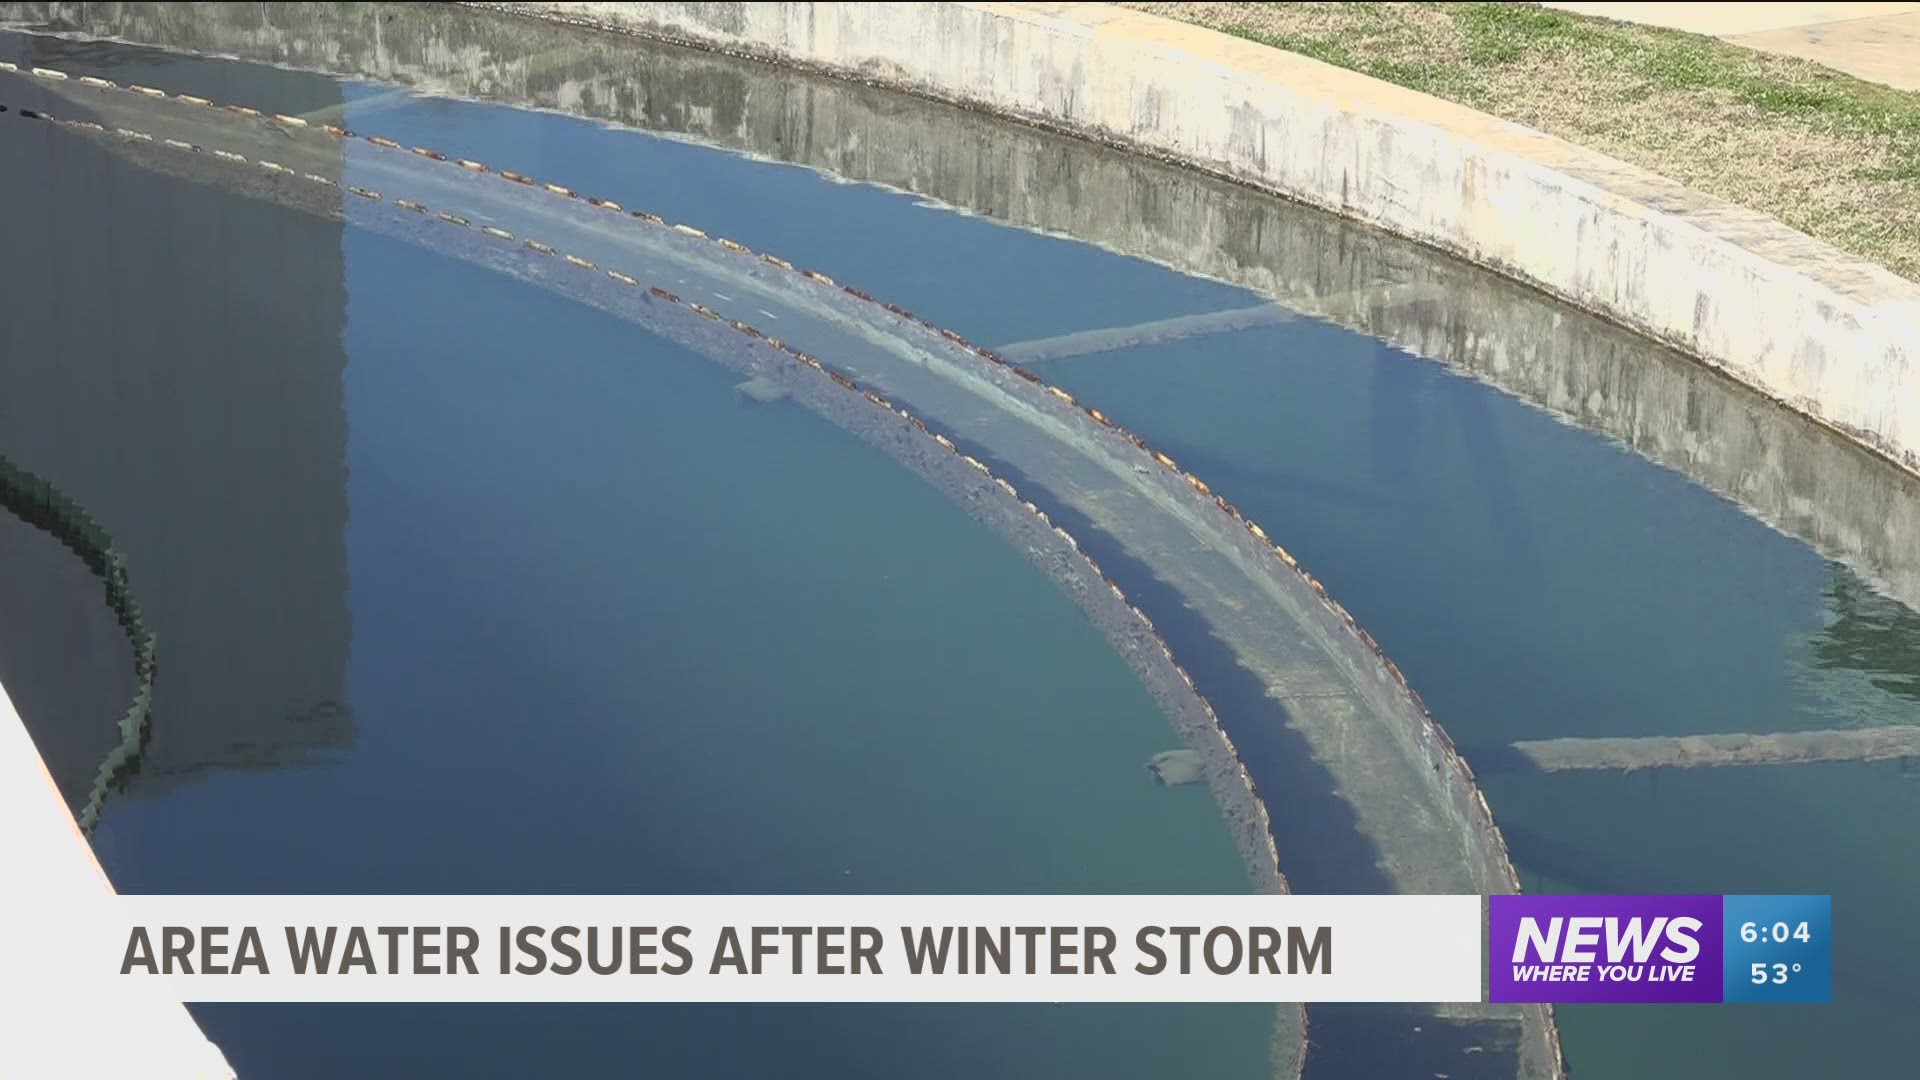 Many in our area see water issues after winter storm